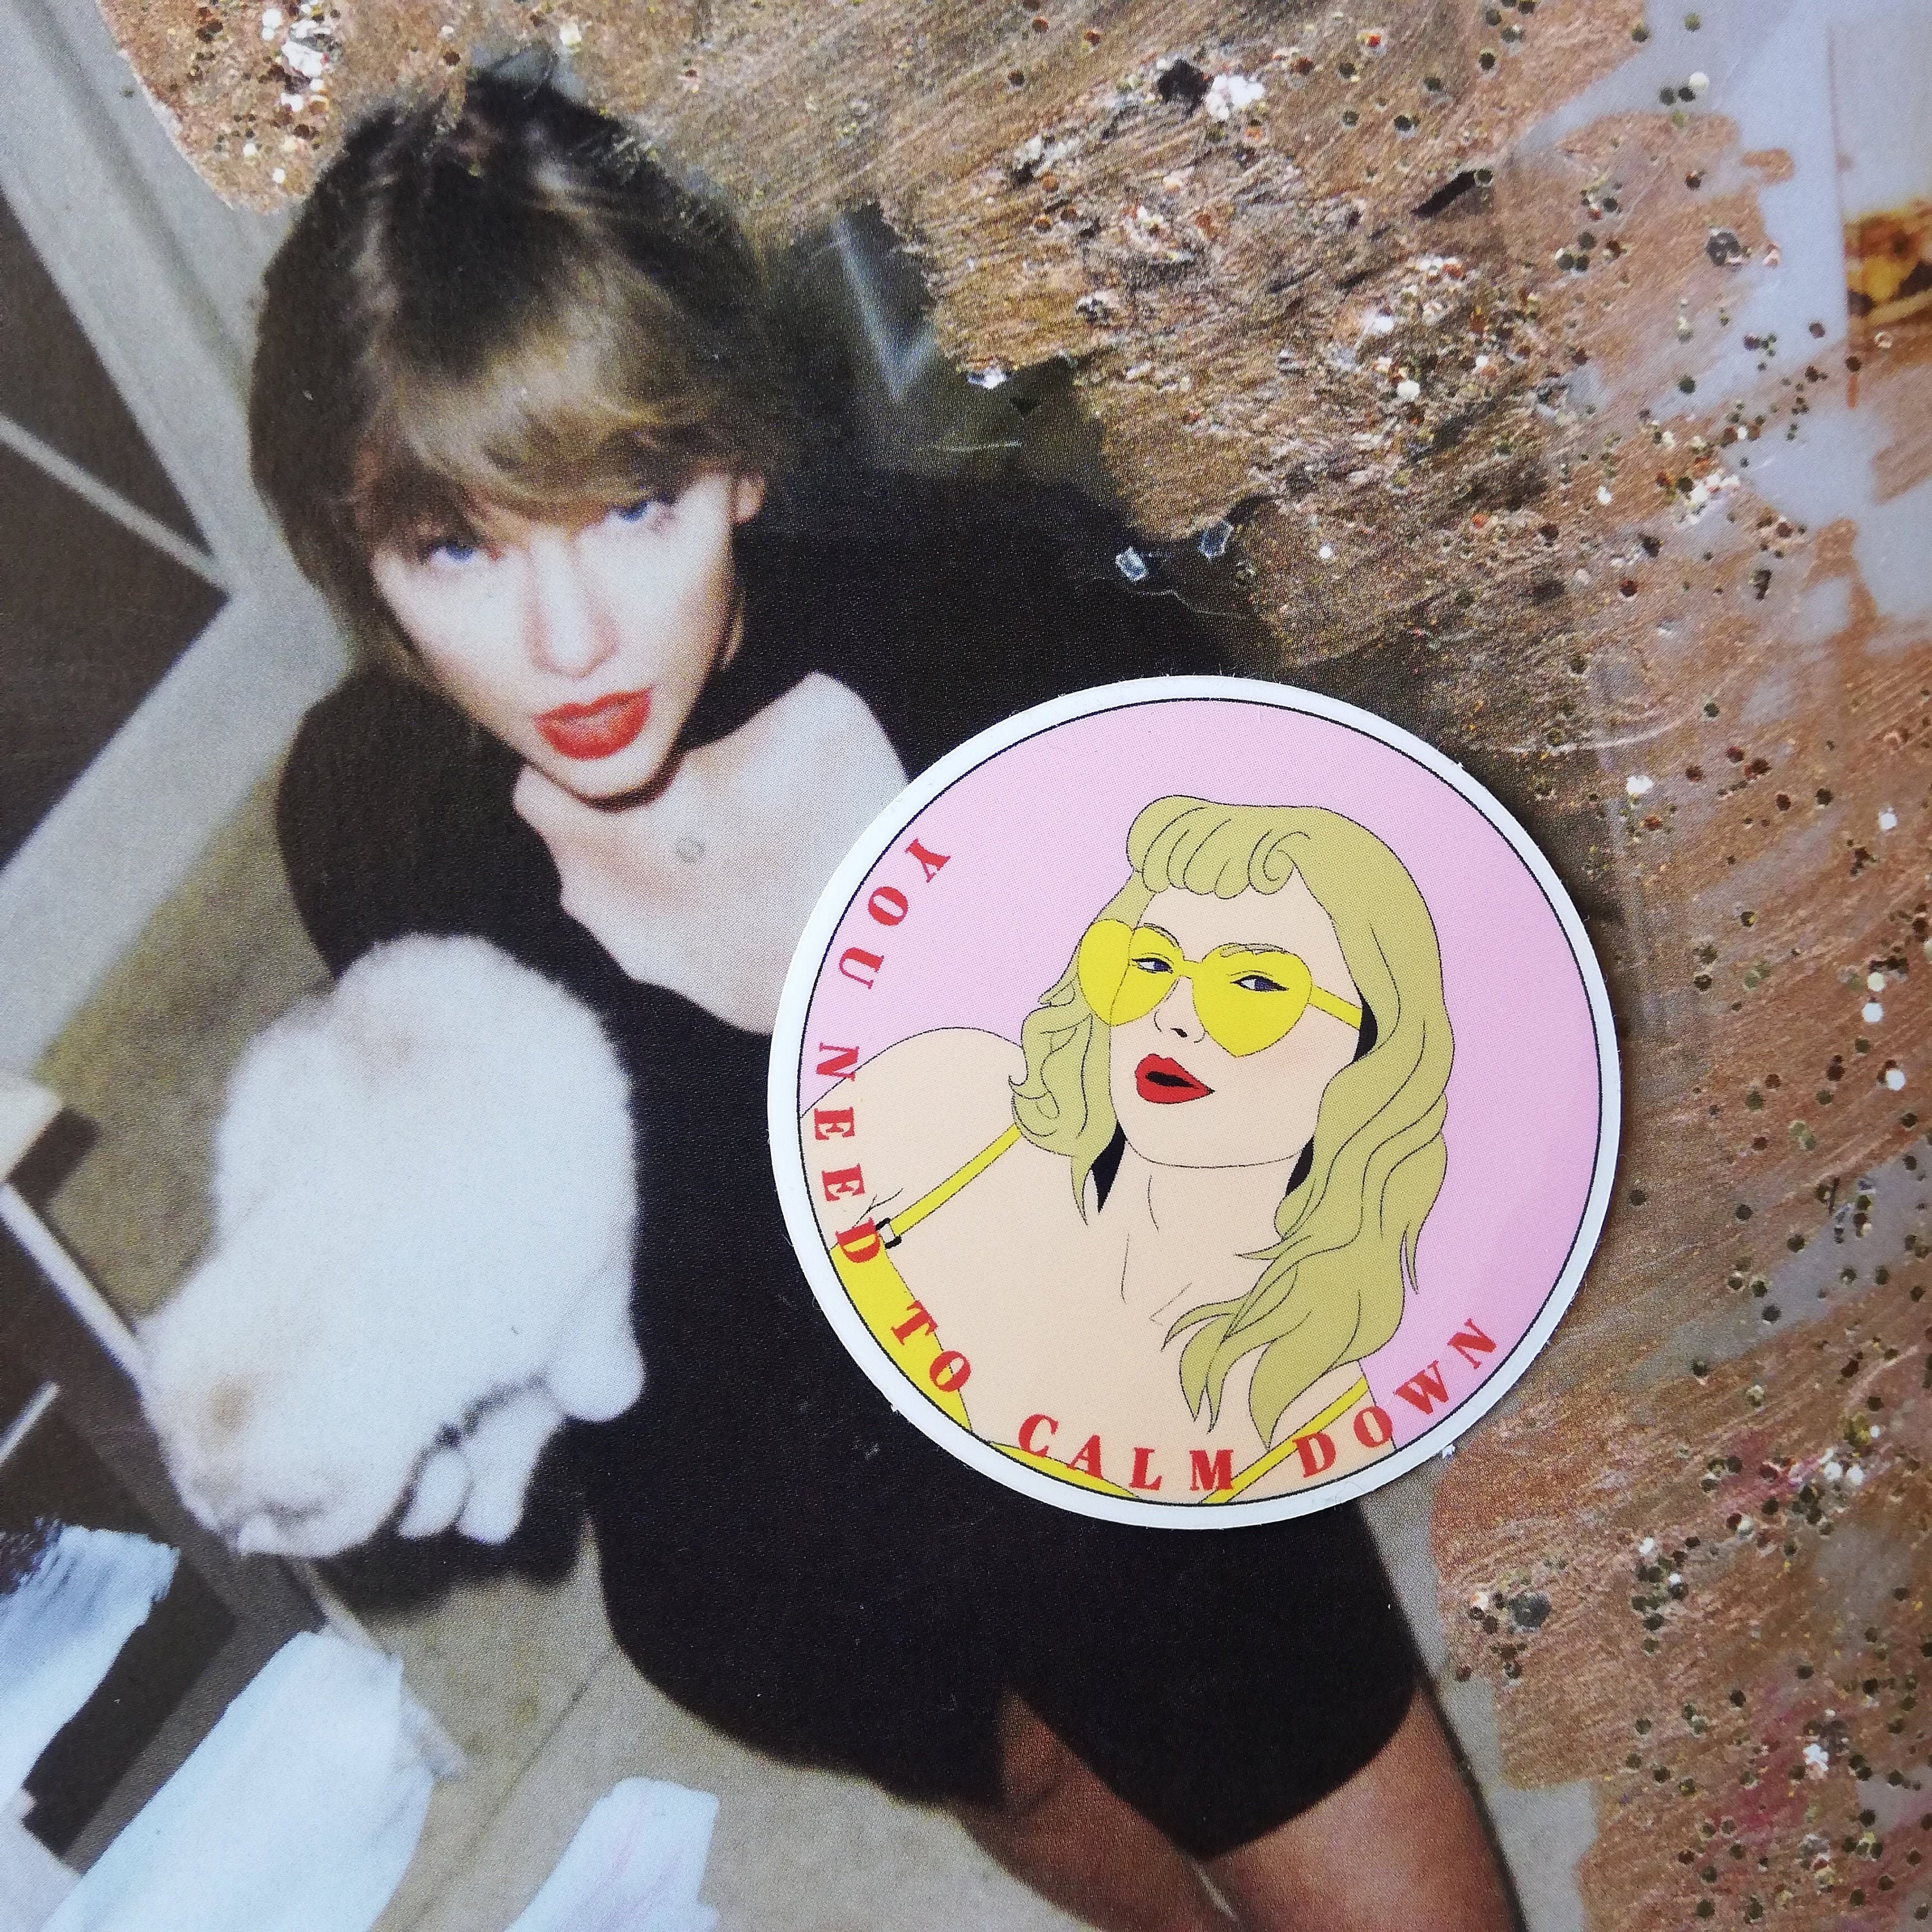 You Need to Calm Down Sticker (Taylor Swift)